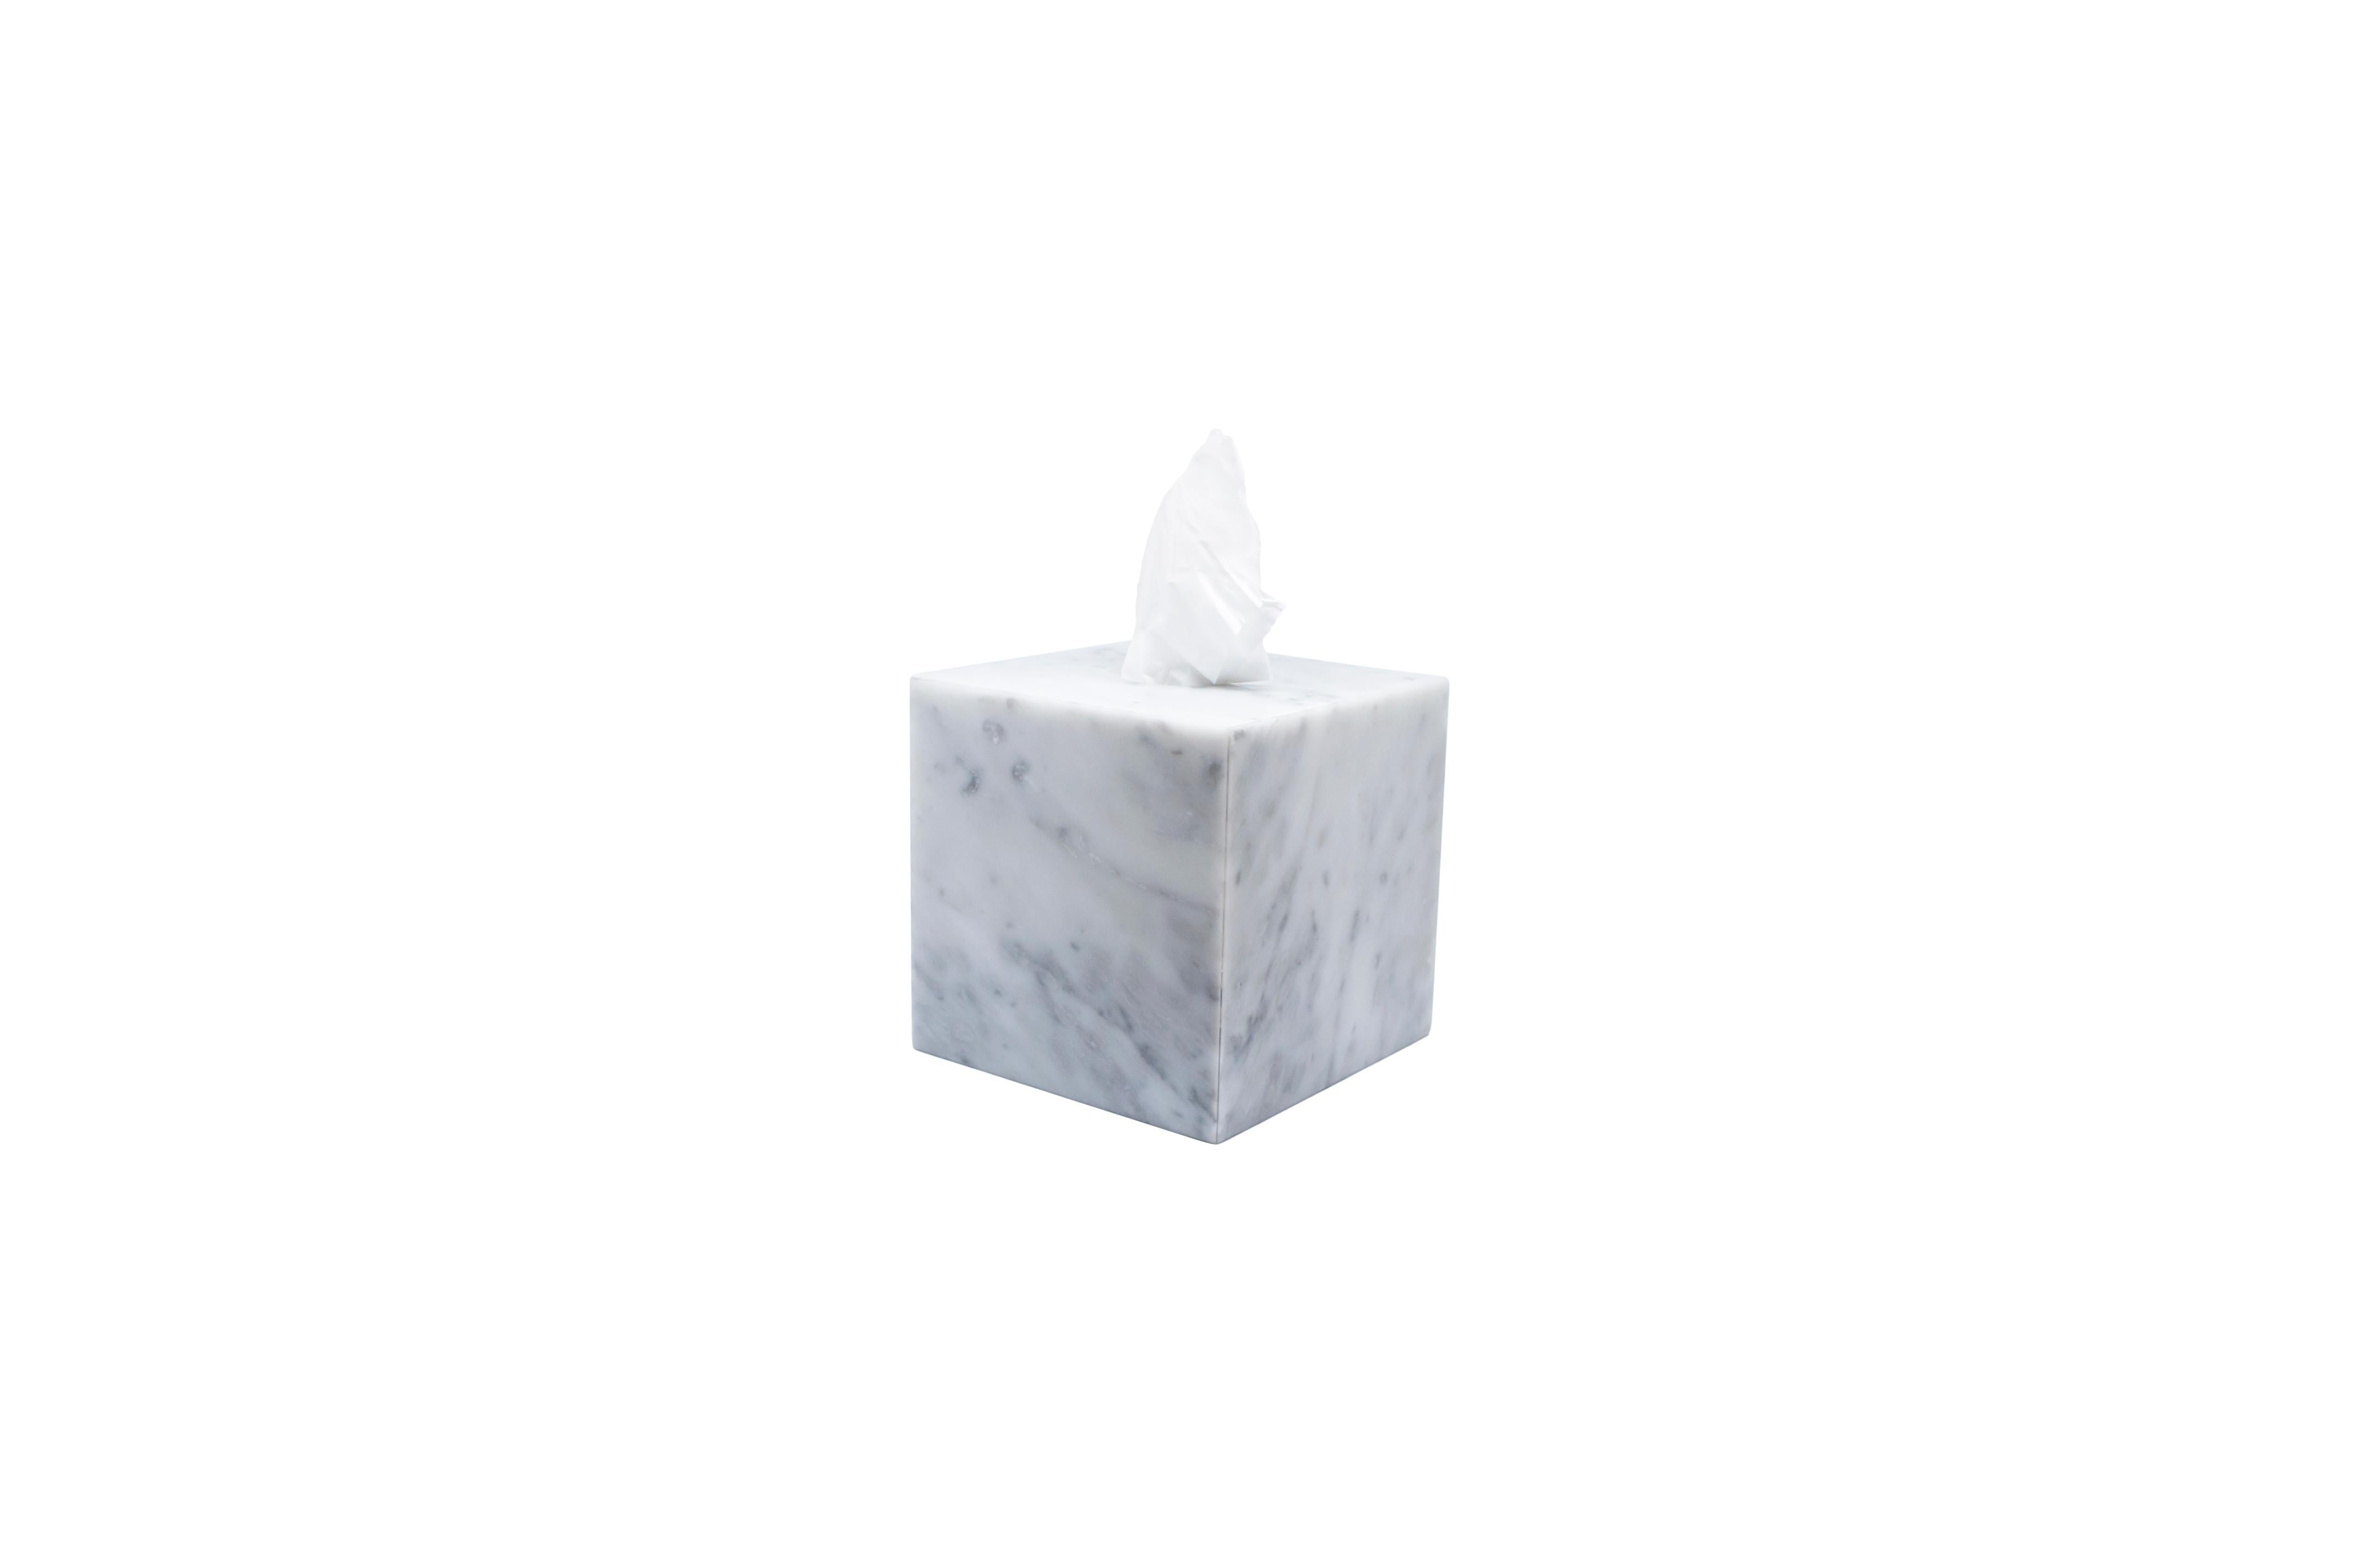 Squared tissues cover box in white Carrara marble. Available also in grey or black marble.
Each piece is in a way unique (every marble block is different in veins and shades) and handmade by Italian artisans specialized over generations in